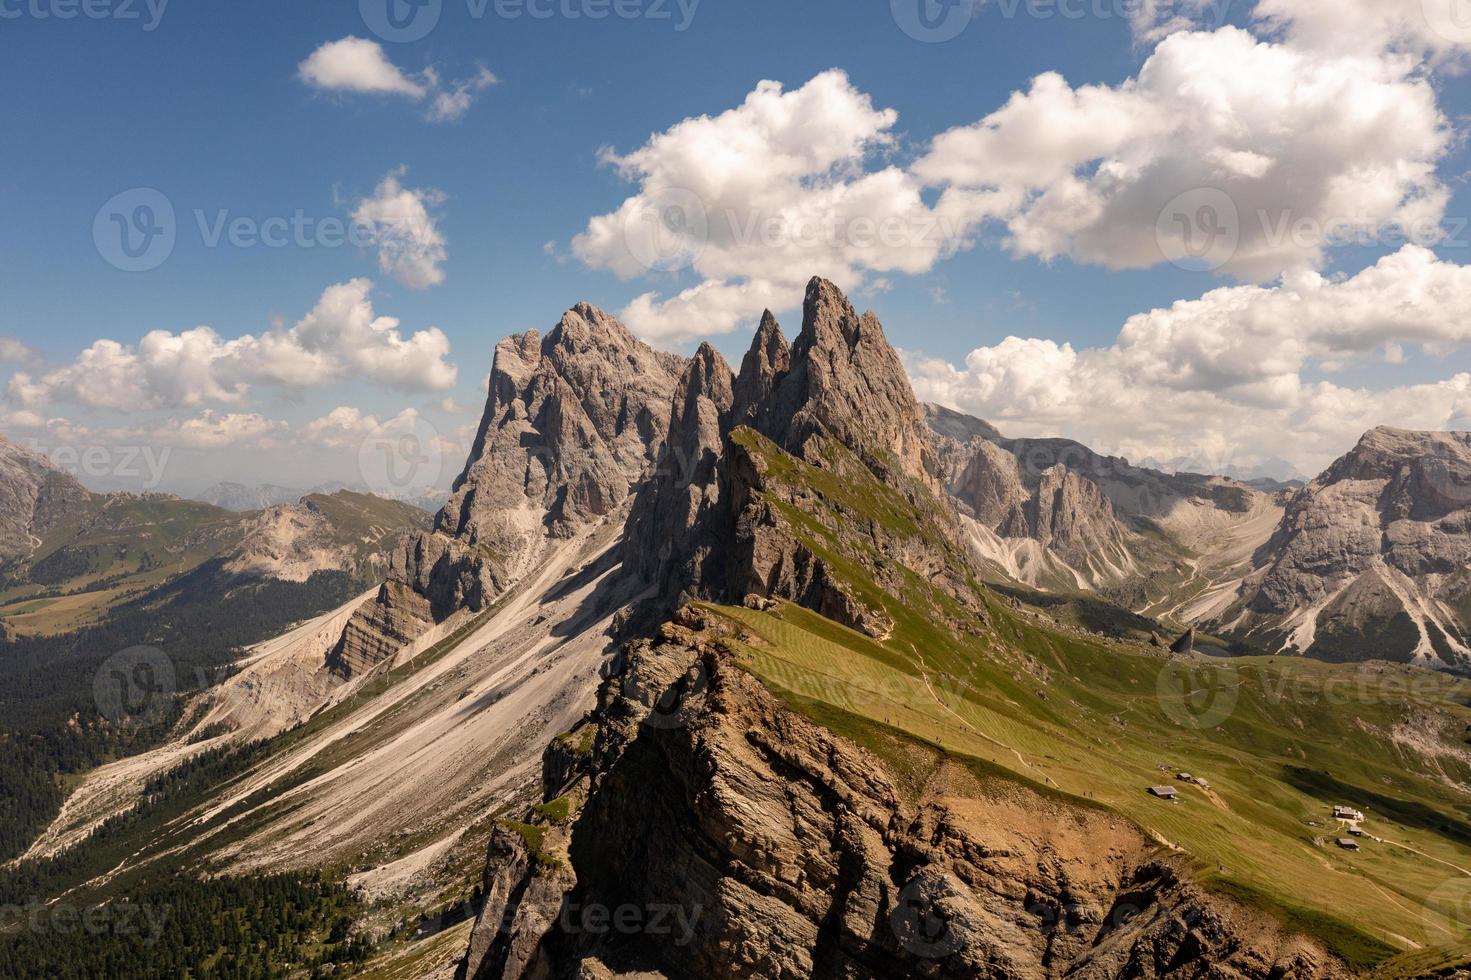 Morning view of the Gardena valley in Dolomite mountains. Location Puez-Geisler National Park, Seceda peak, Italy, Europe. Odle group is the landmark of Val di Funes. photo